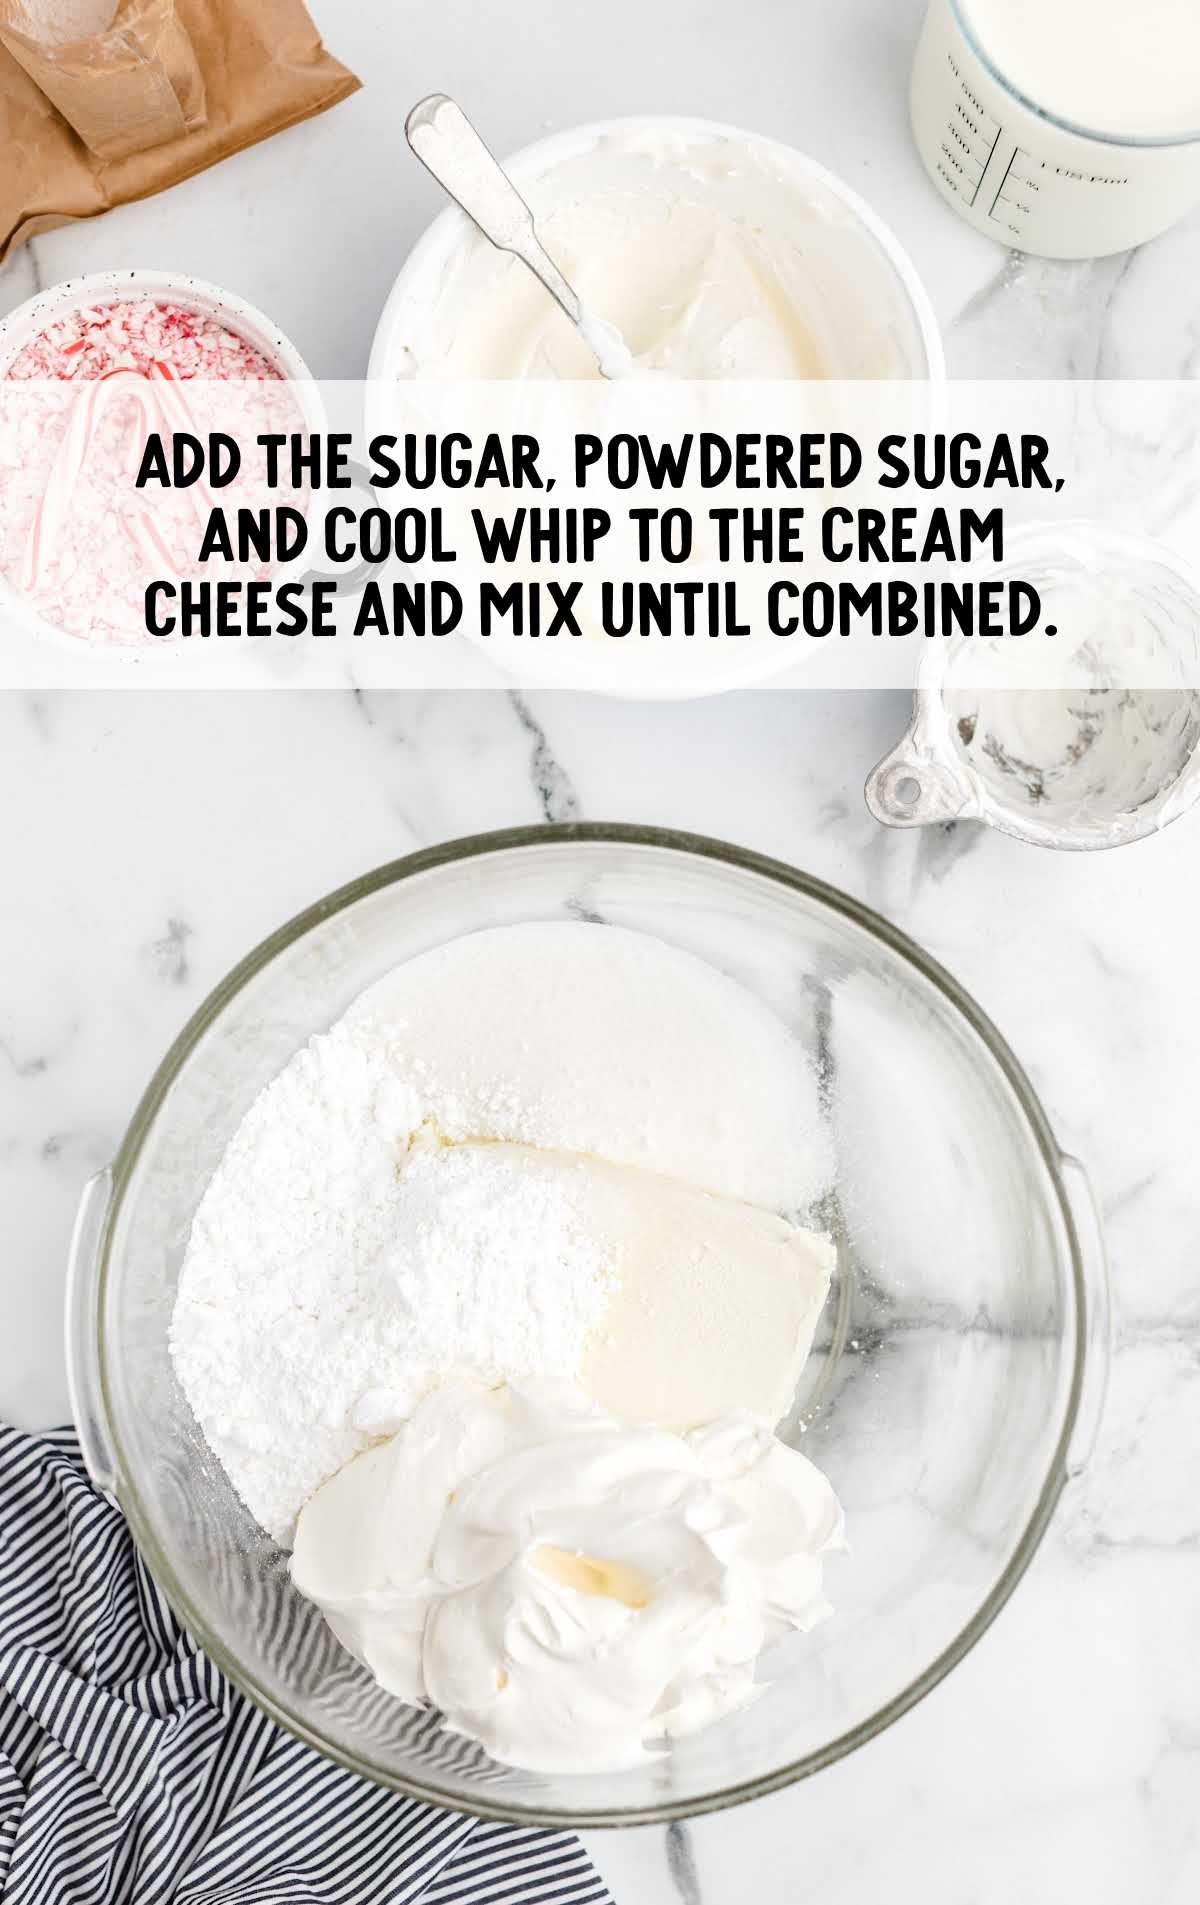 sugar, powdered sugar, and cool whip added to the cream cheese in a bowl